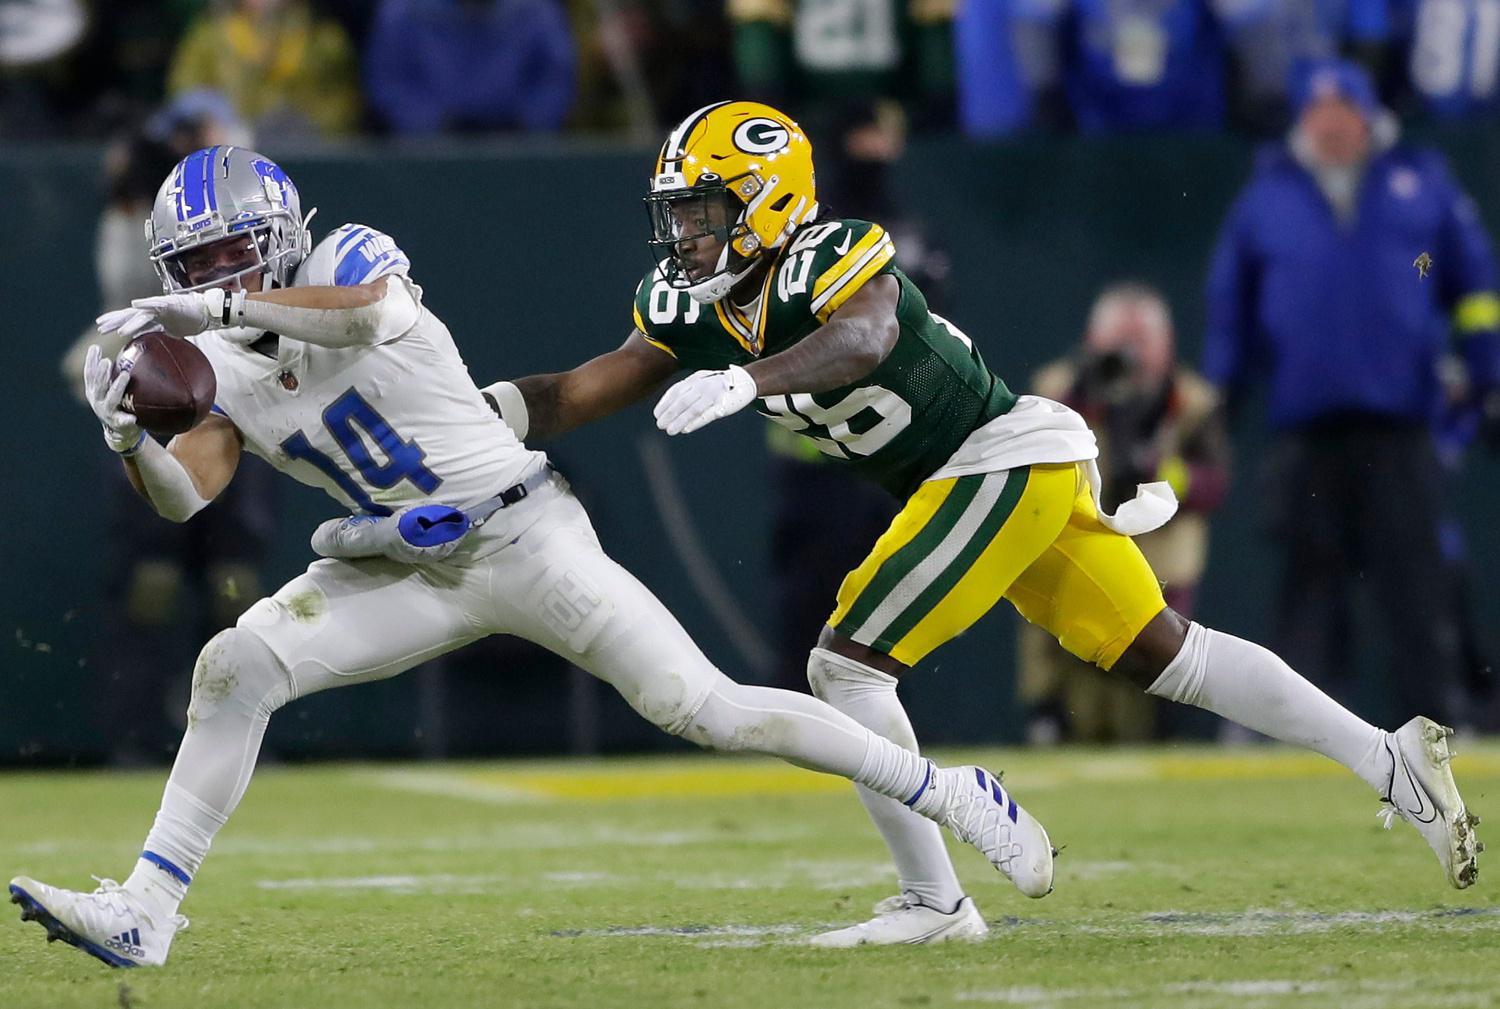 Detroit Lions wide receiver Amon-Ra St. Brown (14) catches a pass in front of Green Bay Packers safety Darnell Savage (26) during their football game on Sunday, January, 8, 2022 at Lambeau Field in Green Bay, Wis. Wm. Glasheen USA TODAY NETWORK-Wisconsin Apc Packers Vs Lions 6166 010823 Wag